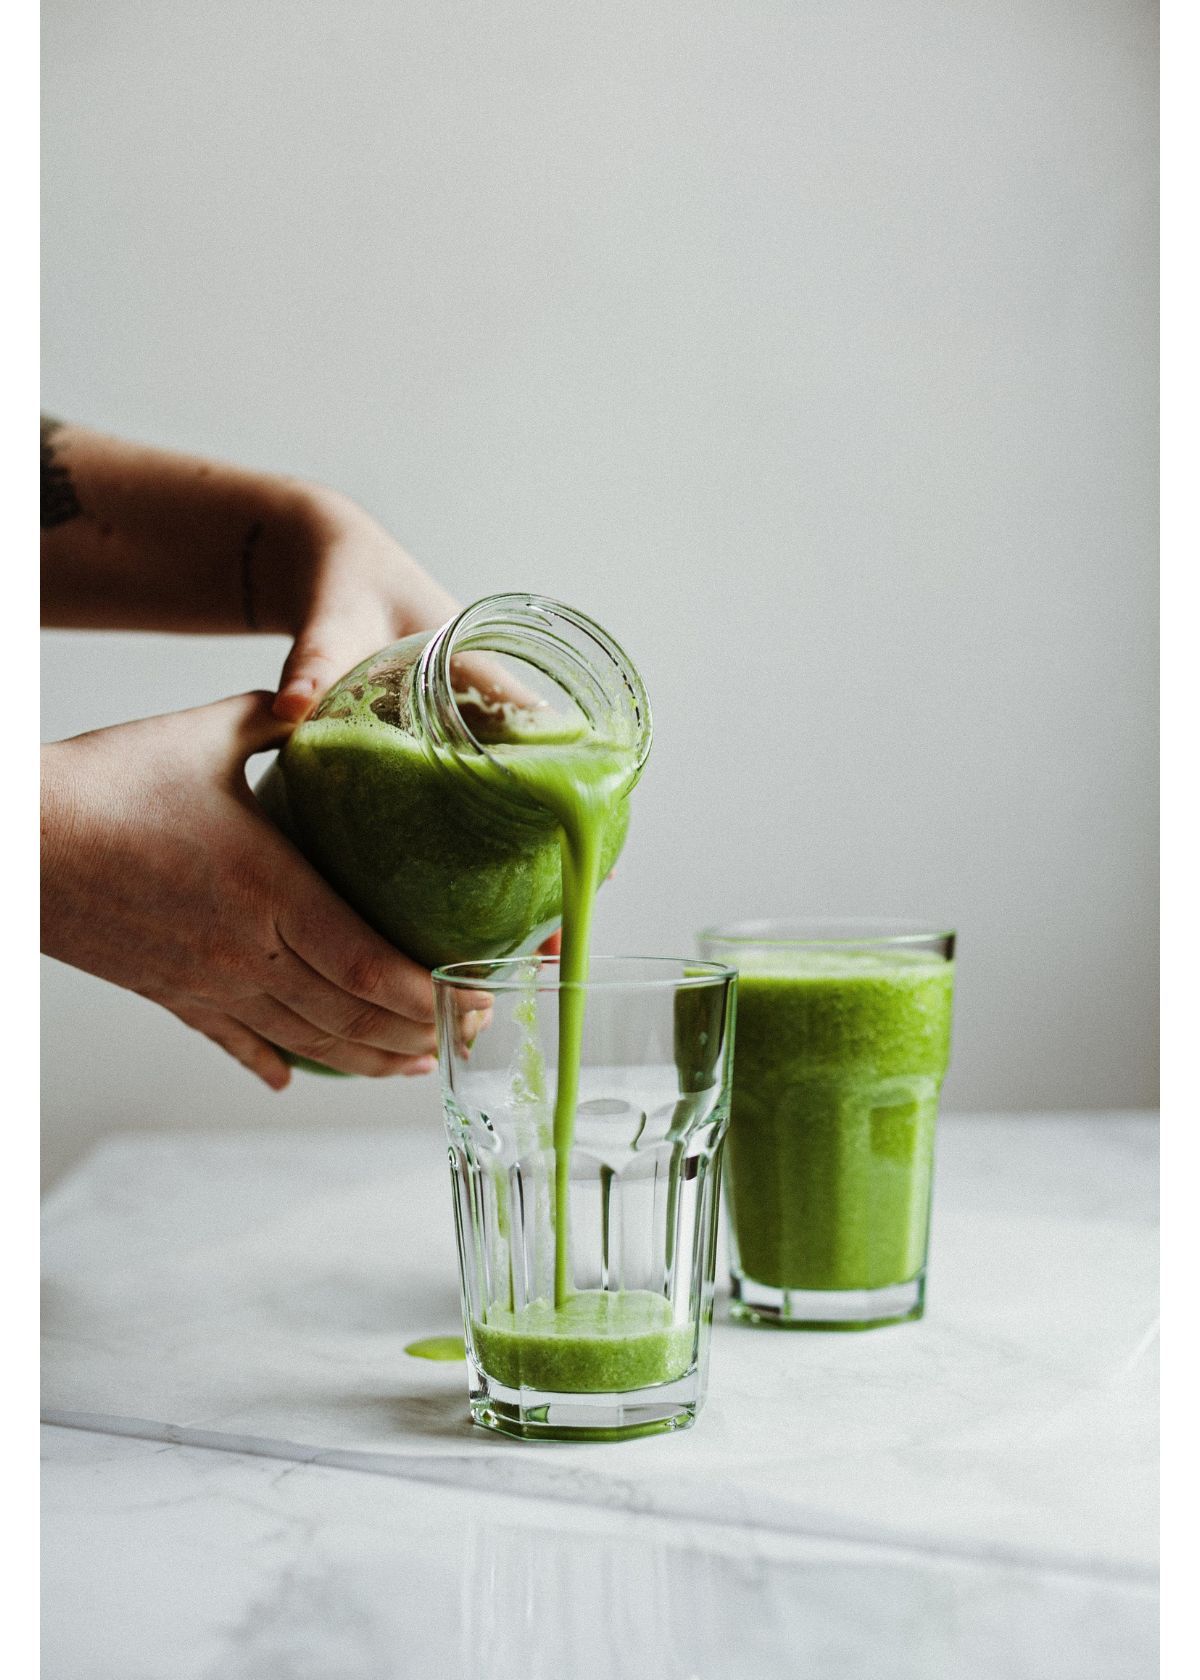 Wanting to Juice Celery We Have The Best Juicers for You